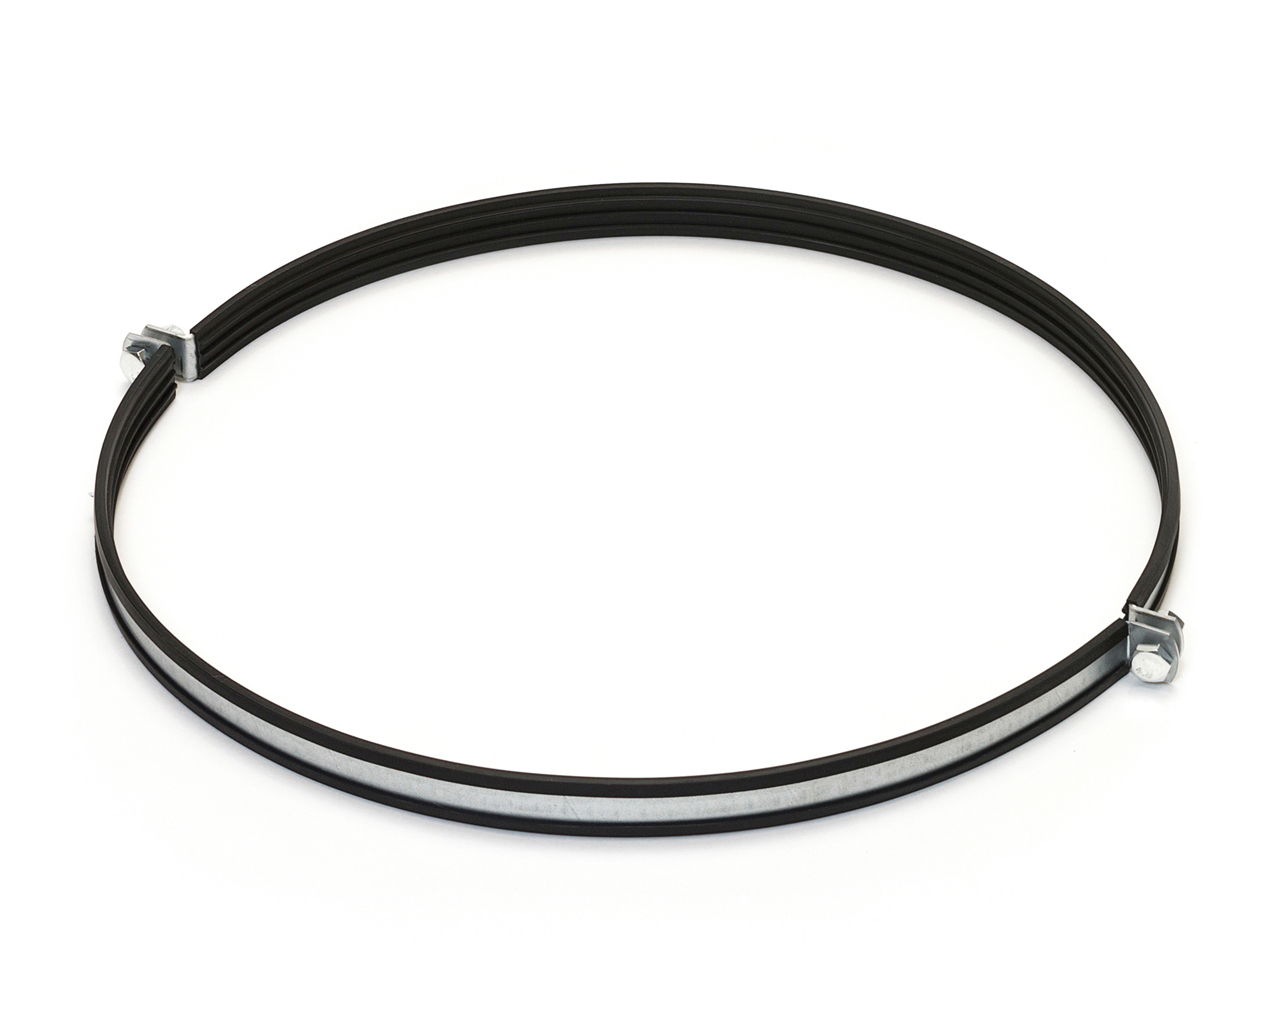 BS045RUB Suspension ring rubber lined M10 (BS...RUB) The BS Suspension ring M10 has a galvanised steel suspension ring with a M10 (10 mm) hole at both points of the segment. The rubber lining ensures that the duct hangs or stands in the suspension rings vibration-free.